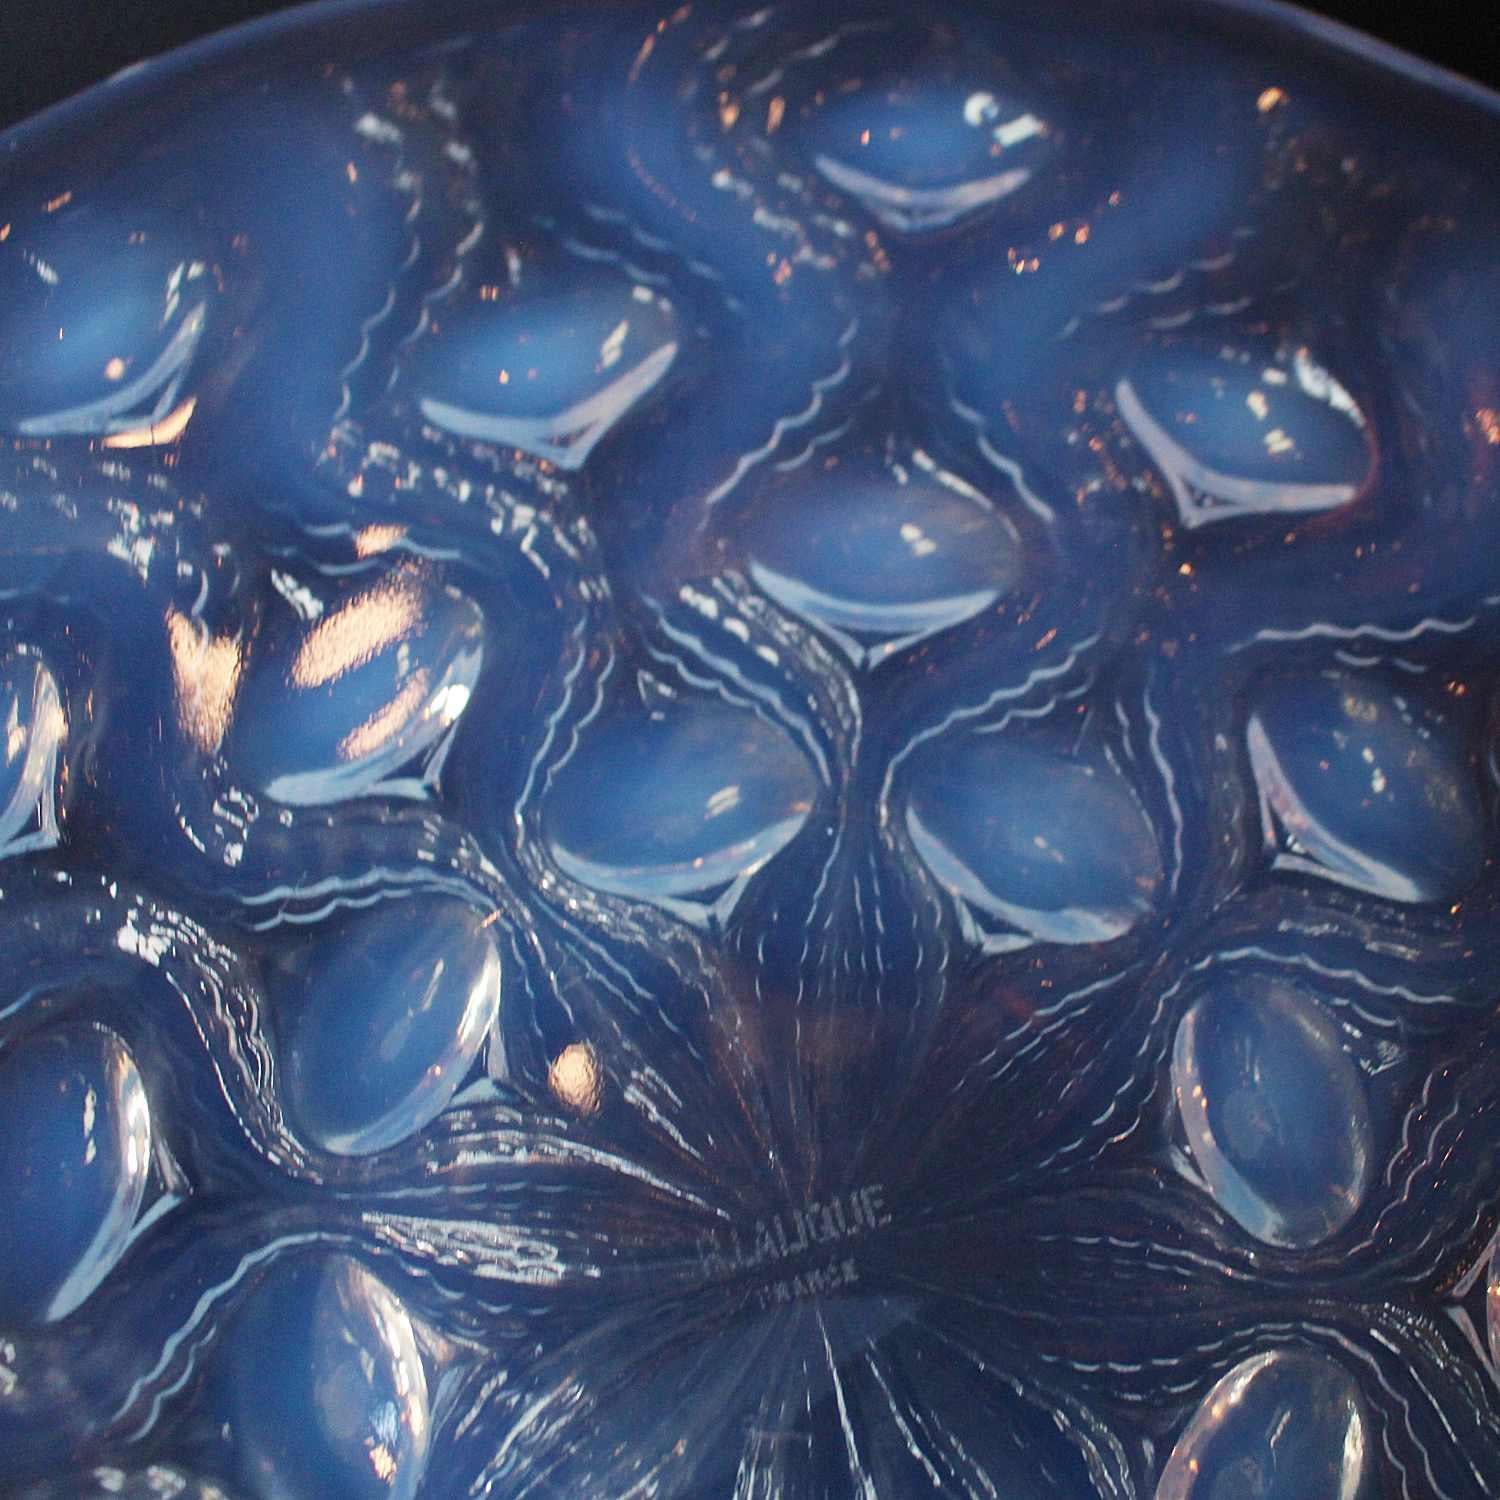 Bulbes no. 2, an Art Deco, opalescent and clear glass coupe bowl. Decorated with radiating pattern of reverse raised stylized flower bulbs. Stencil etched R. Lalique France to underside.
Model no. 3302.
Literature: Marcilhac Catalogue Raisonne de